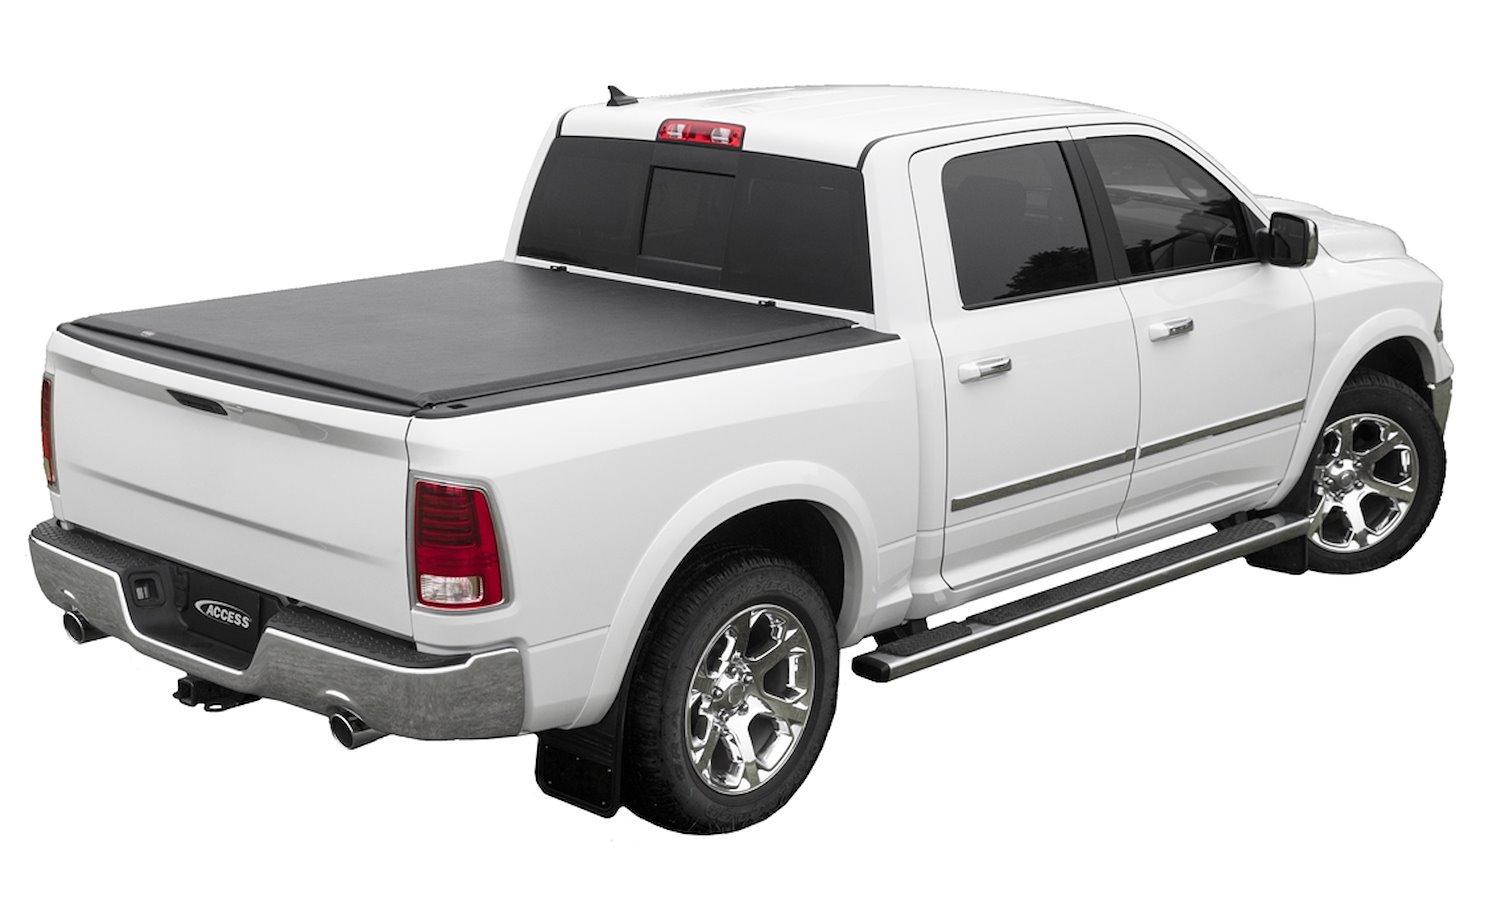 LORADO Roll-Up Tonneau Cover, Fits Select Ram 1500, with 6 ft. 4 in. Bed